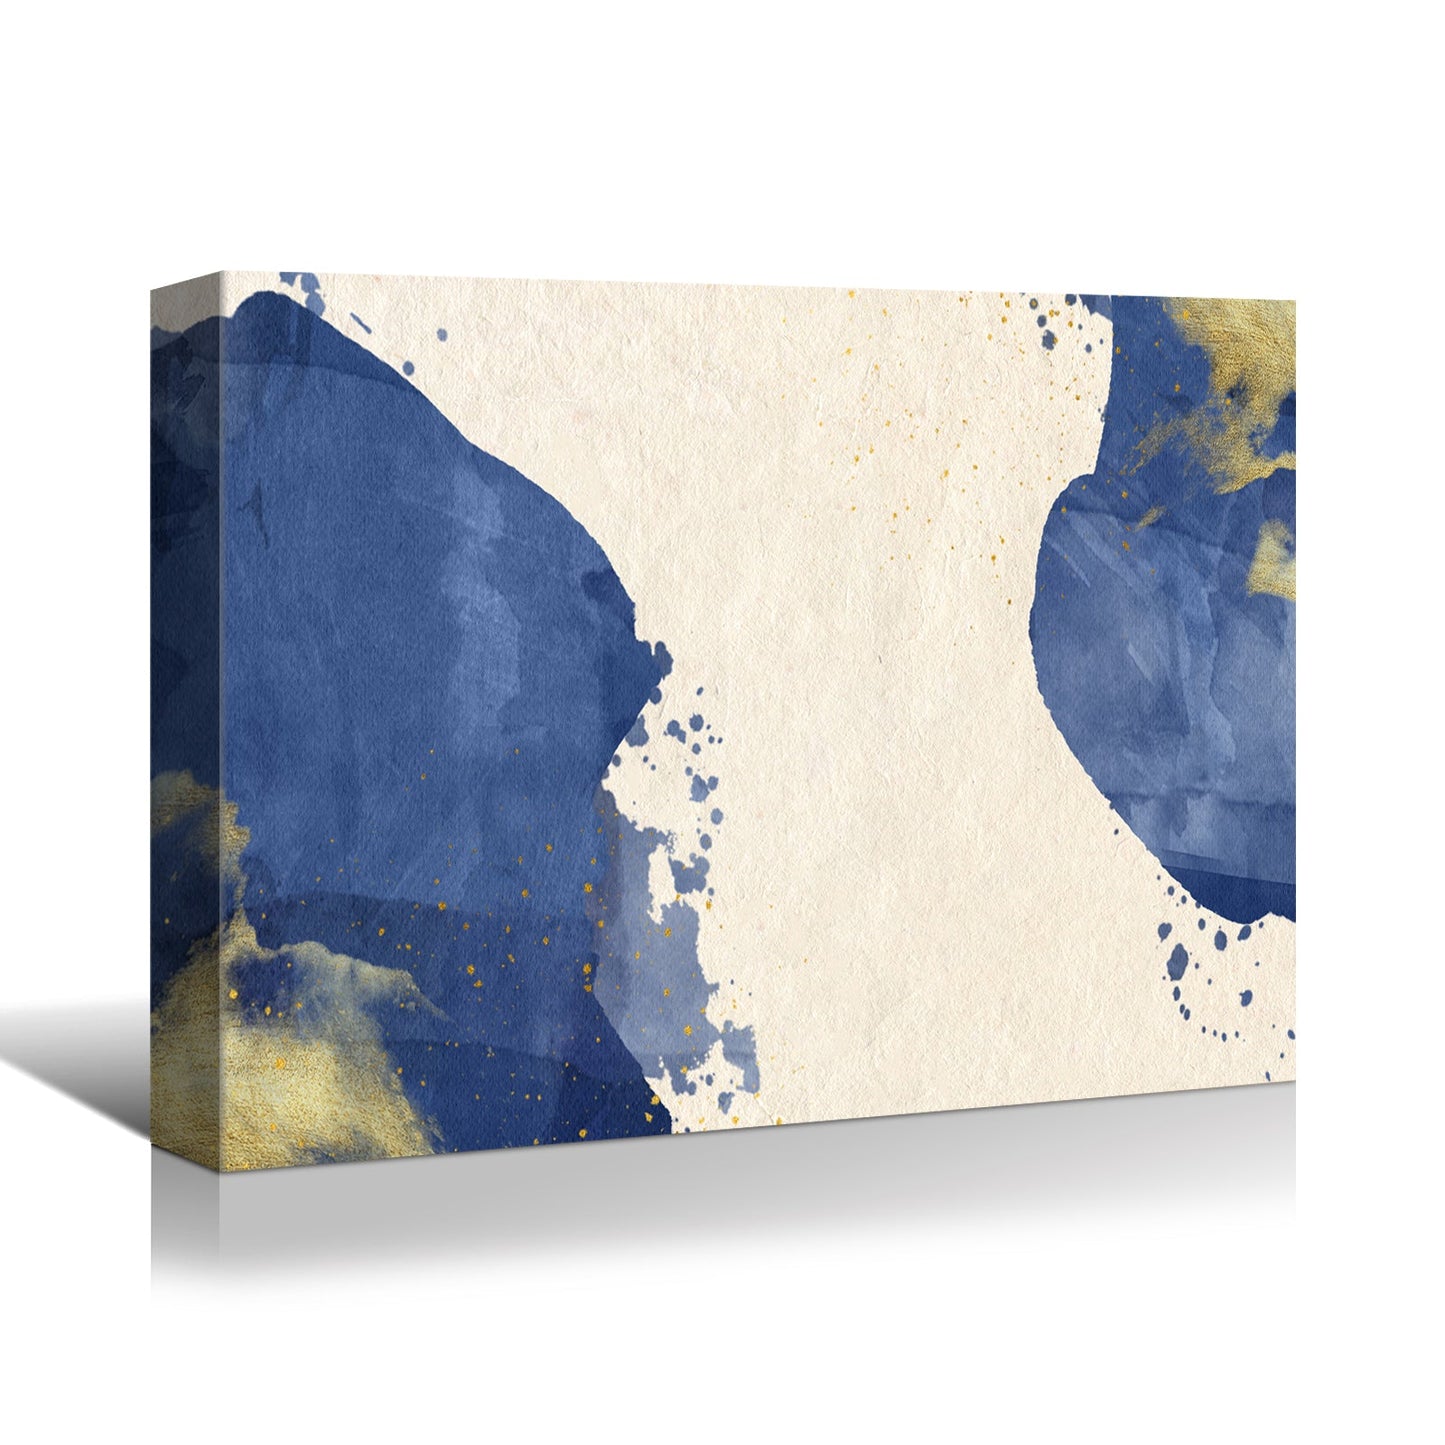 Framed Canvas Wall Art Decor Abstract Painting, Blue and White Color Decoration For Office Living Room, Bedroom Decor-Ready To Hang